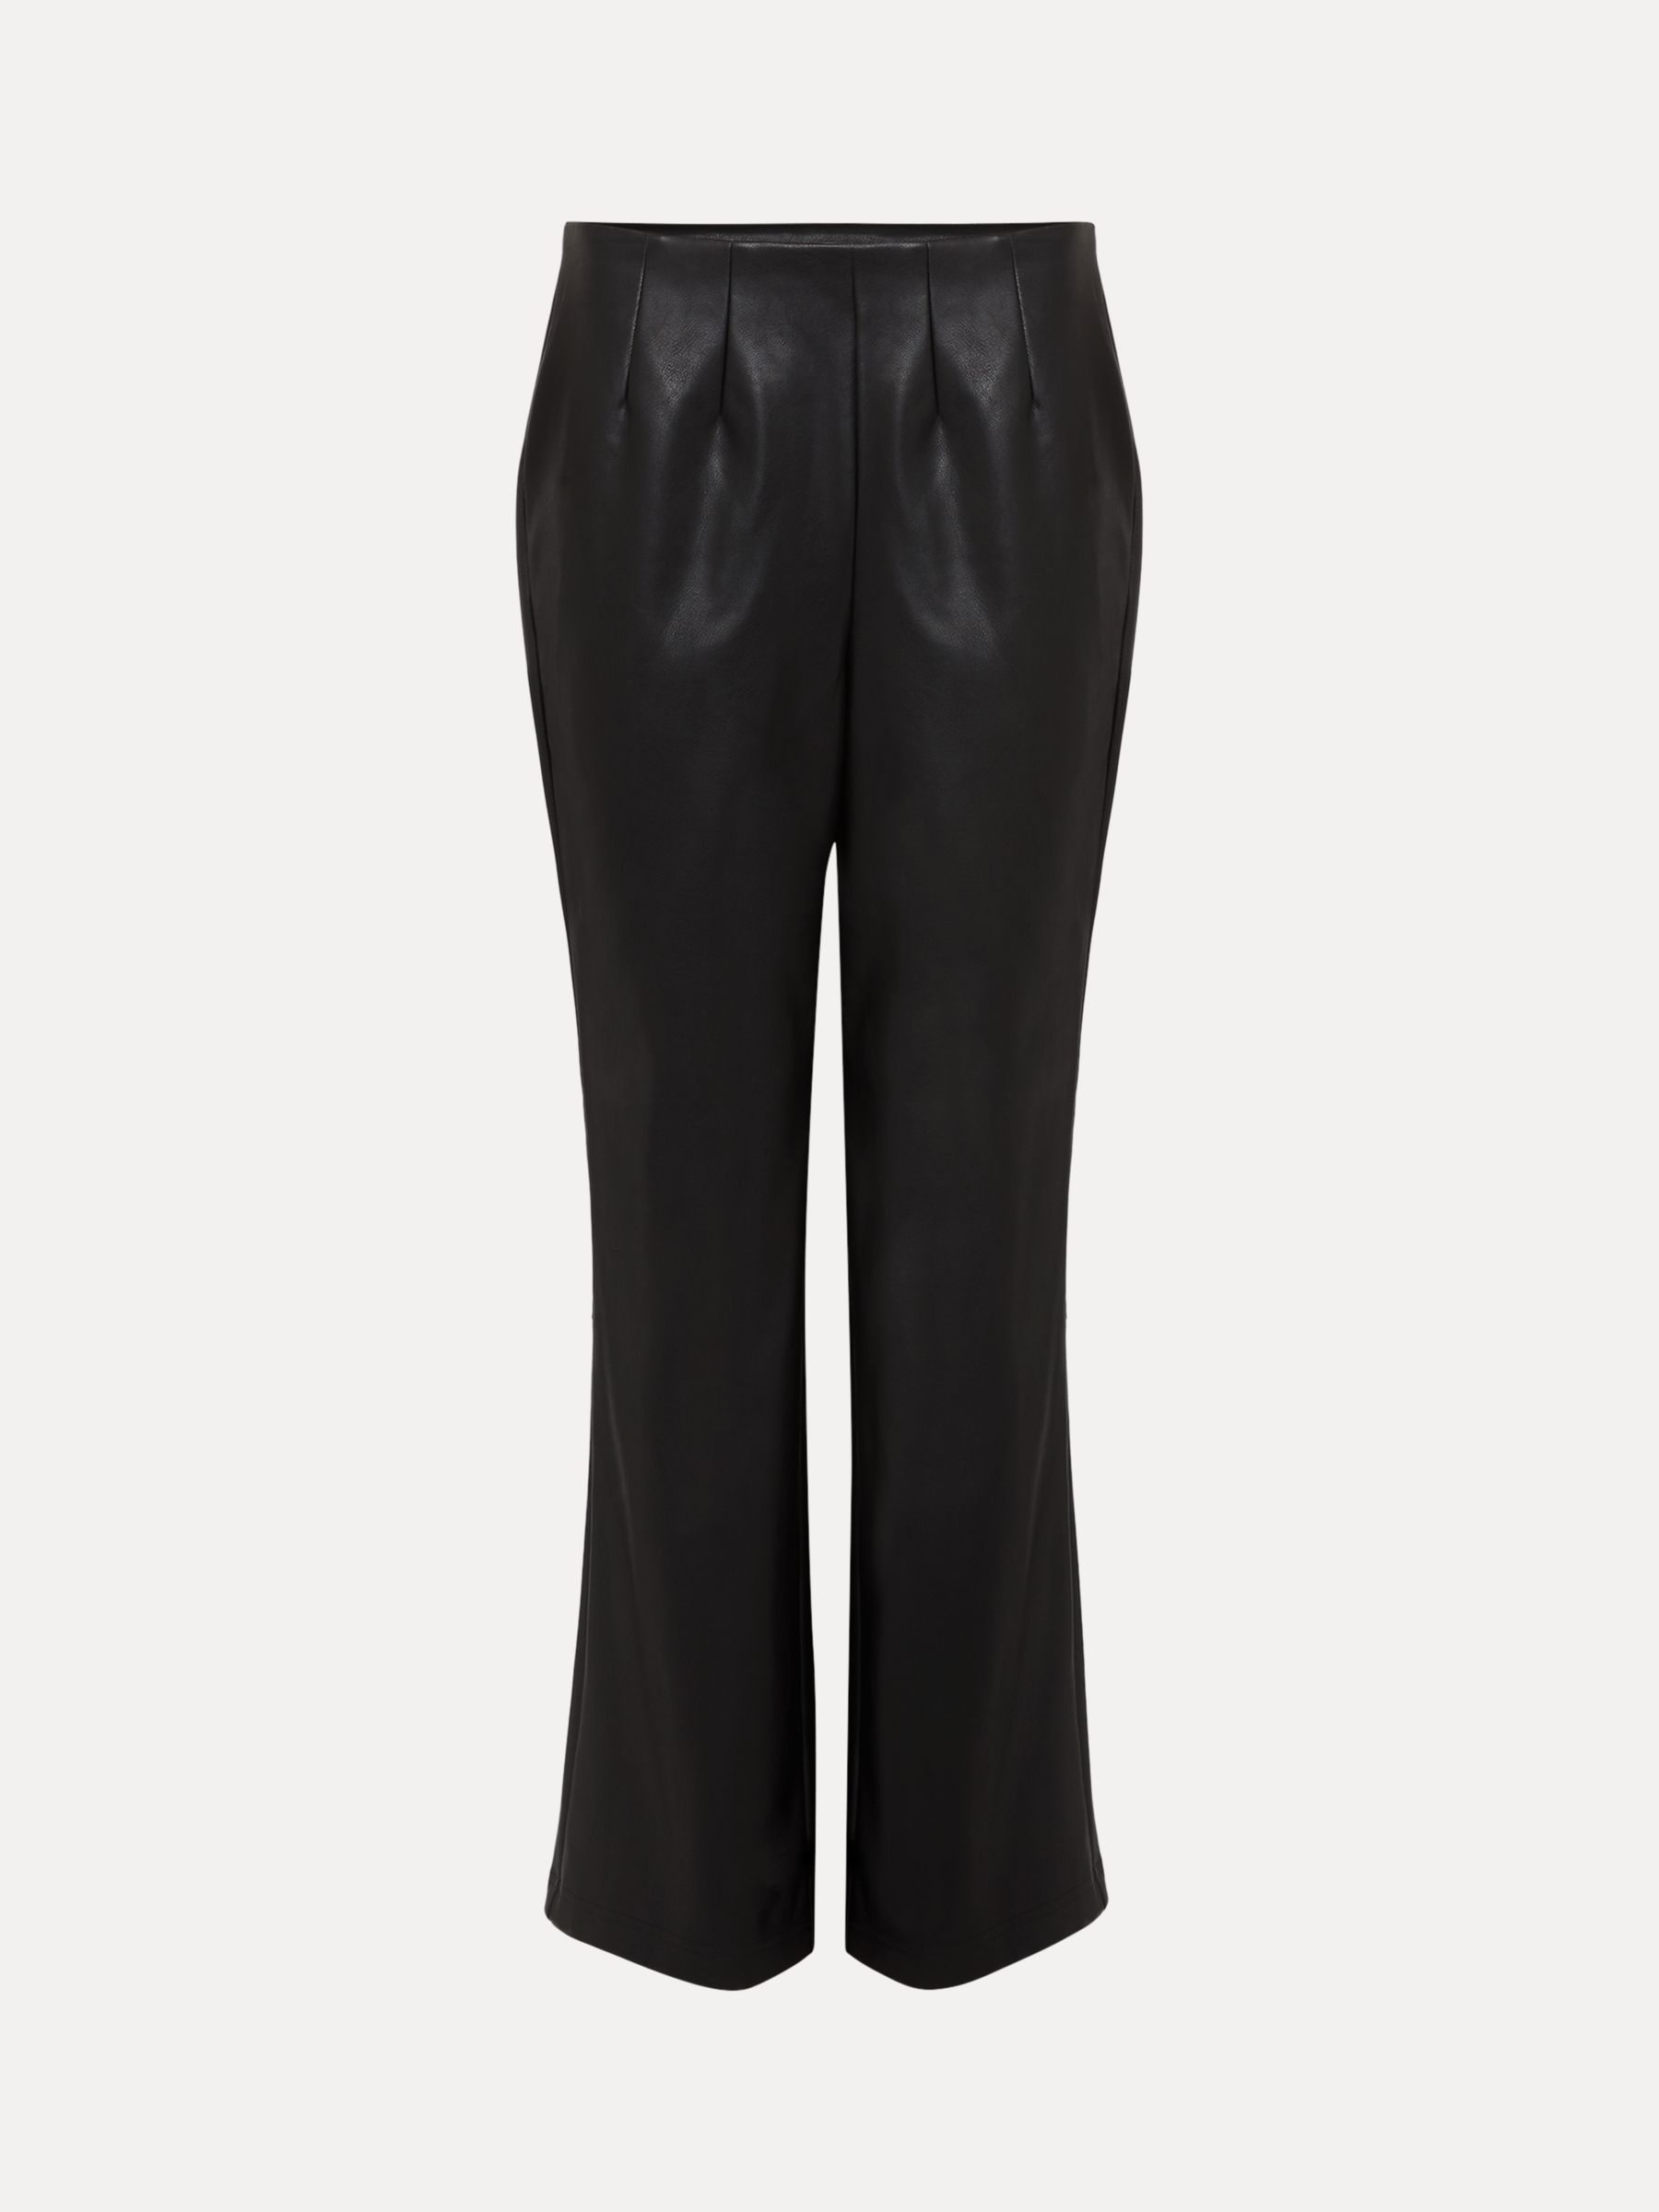 Buy Phase Eight Marielle Faux Leather Trousers, Black Online at johnlewis.com